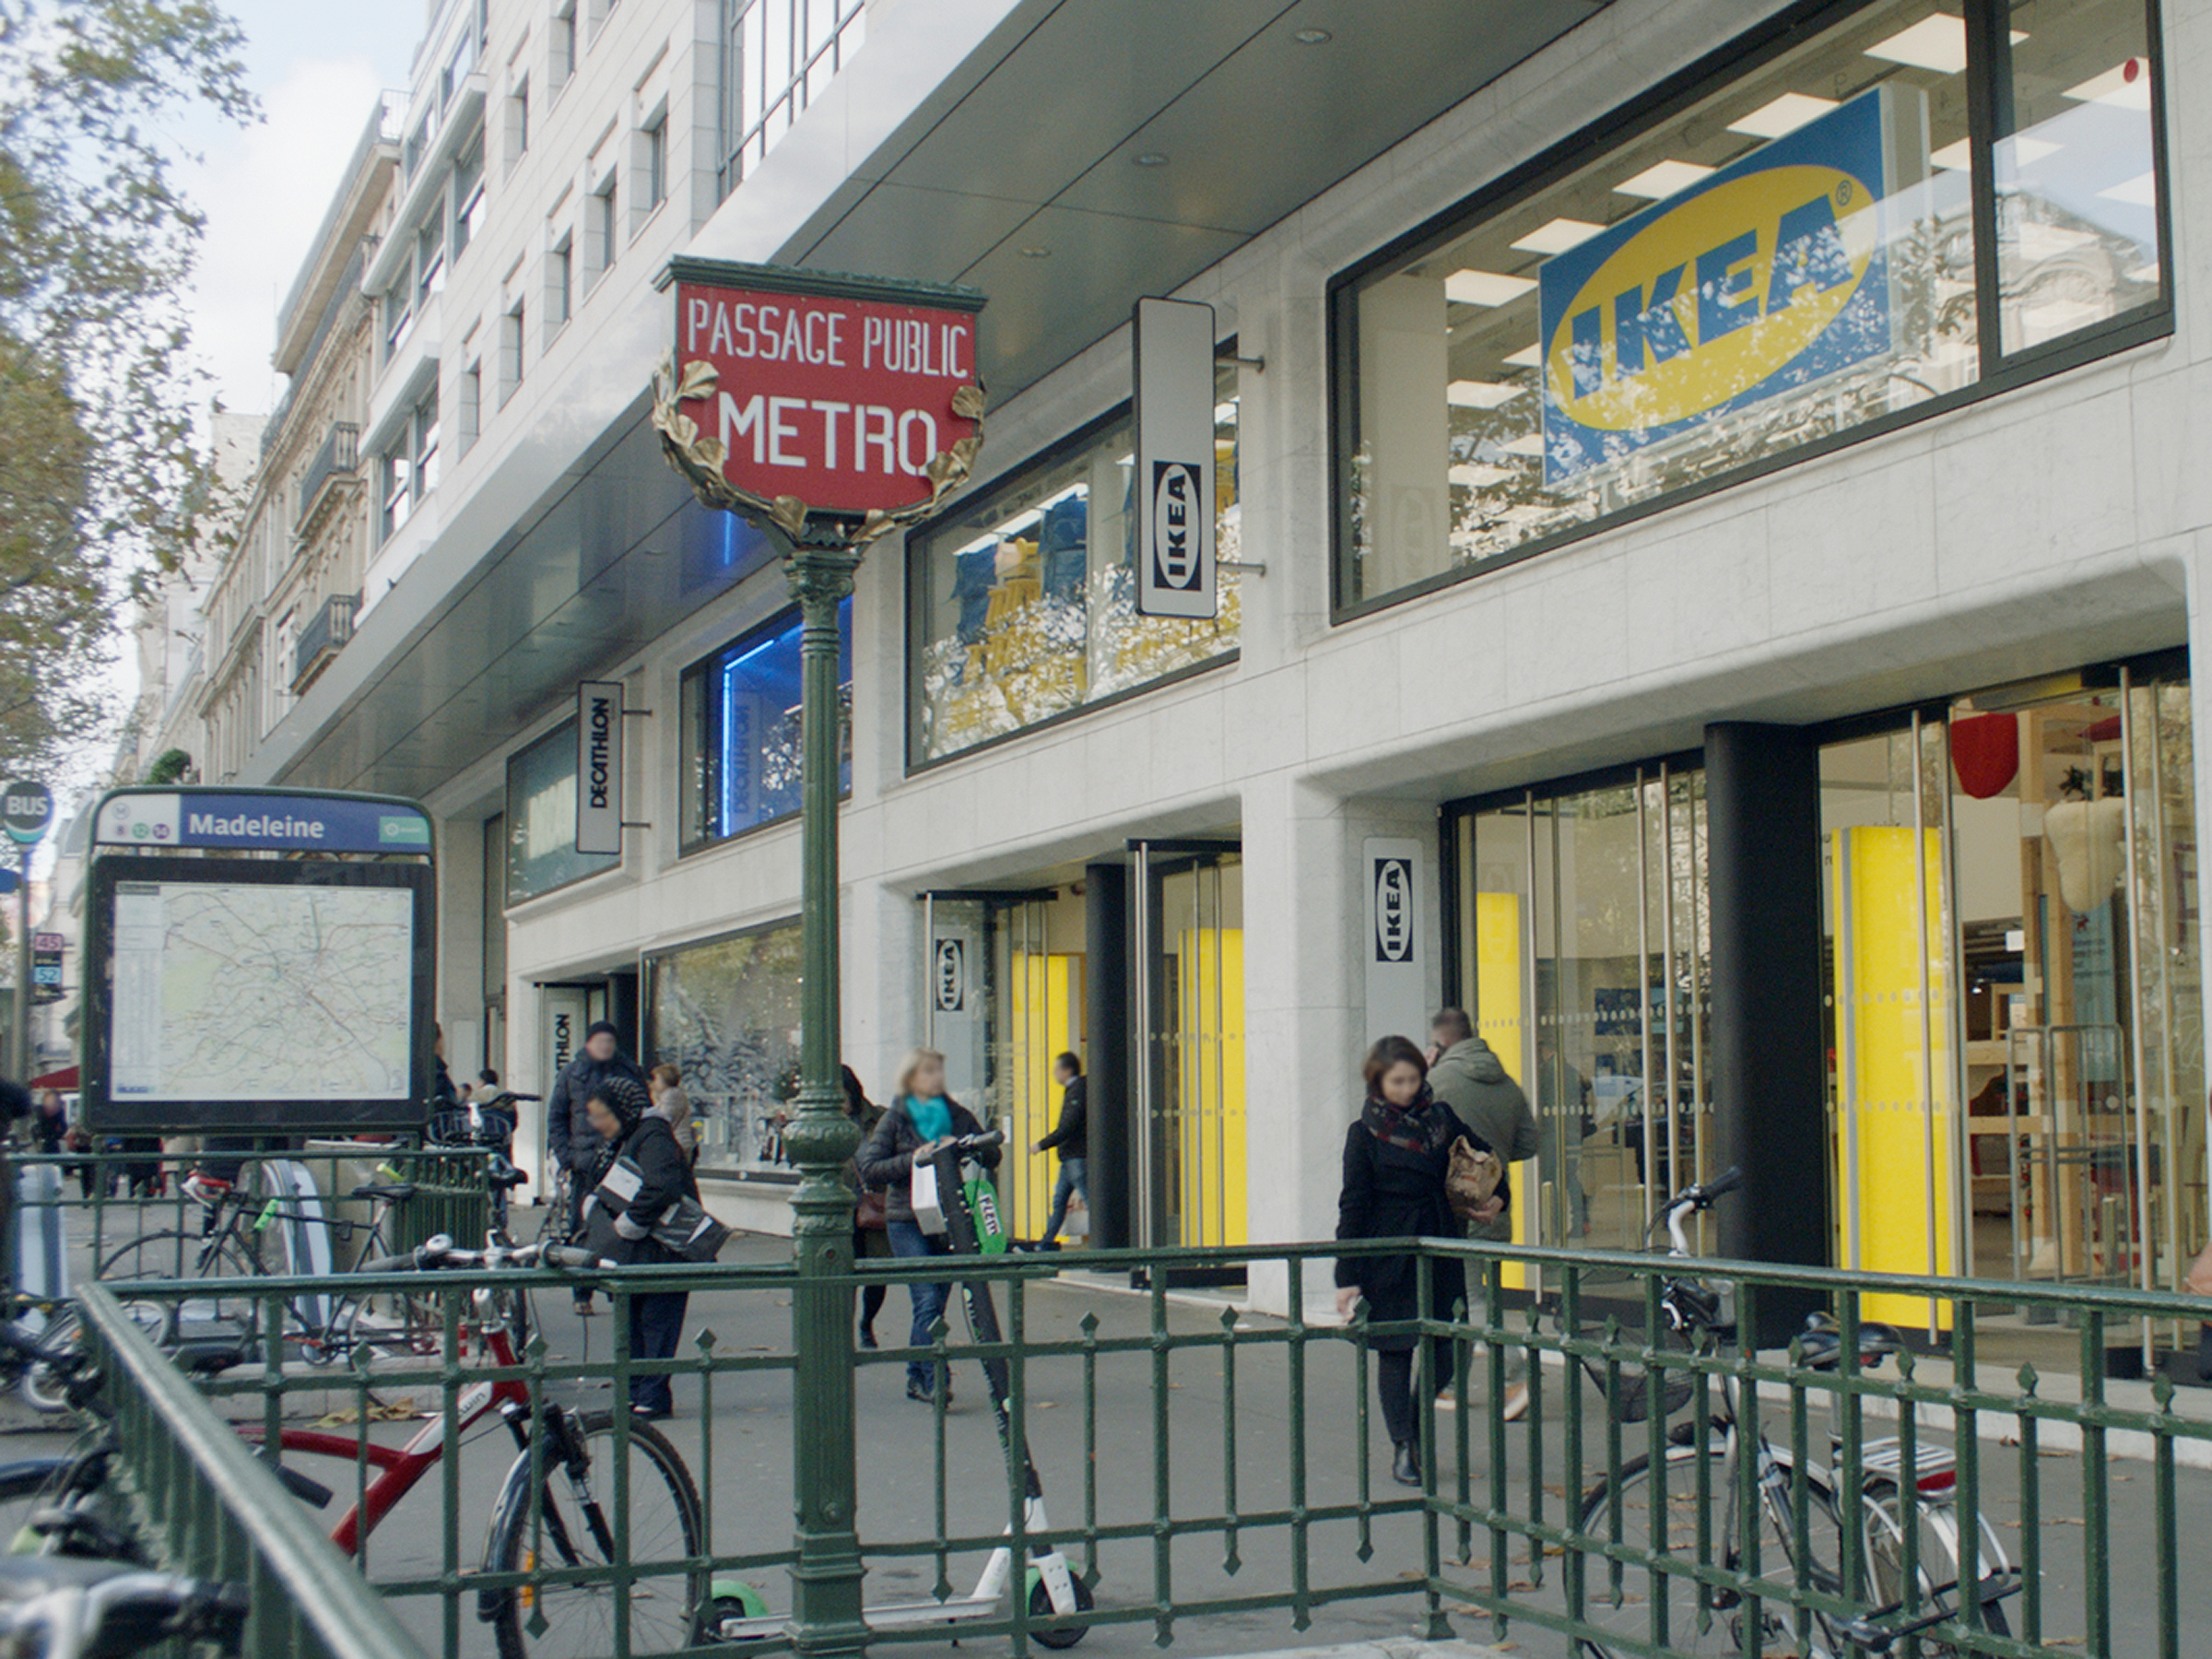 Bringing the IKEA Brand closer to the people of Paris.